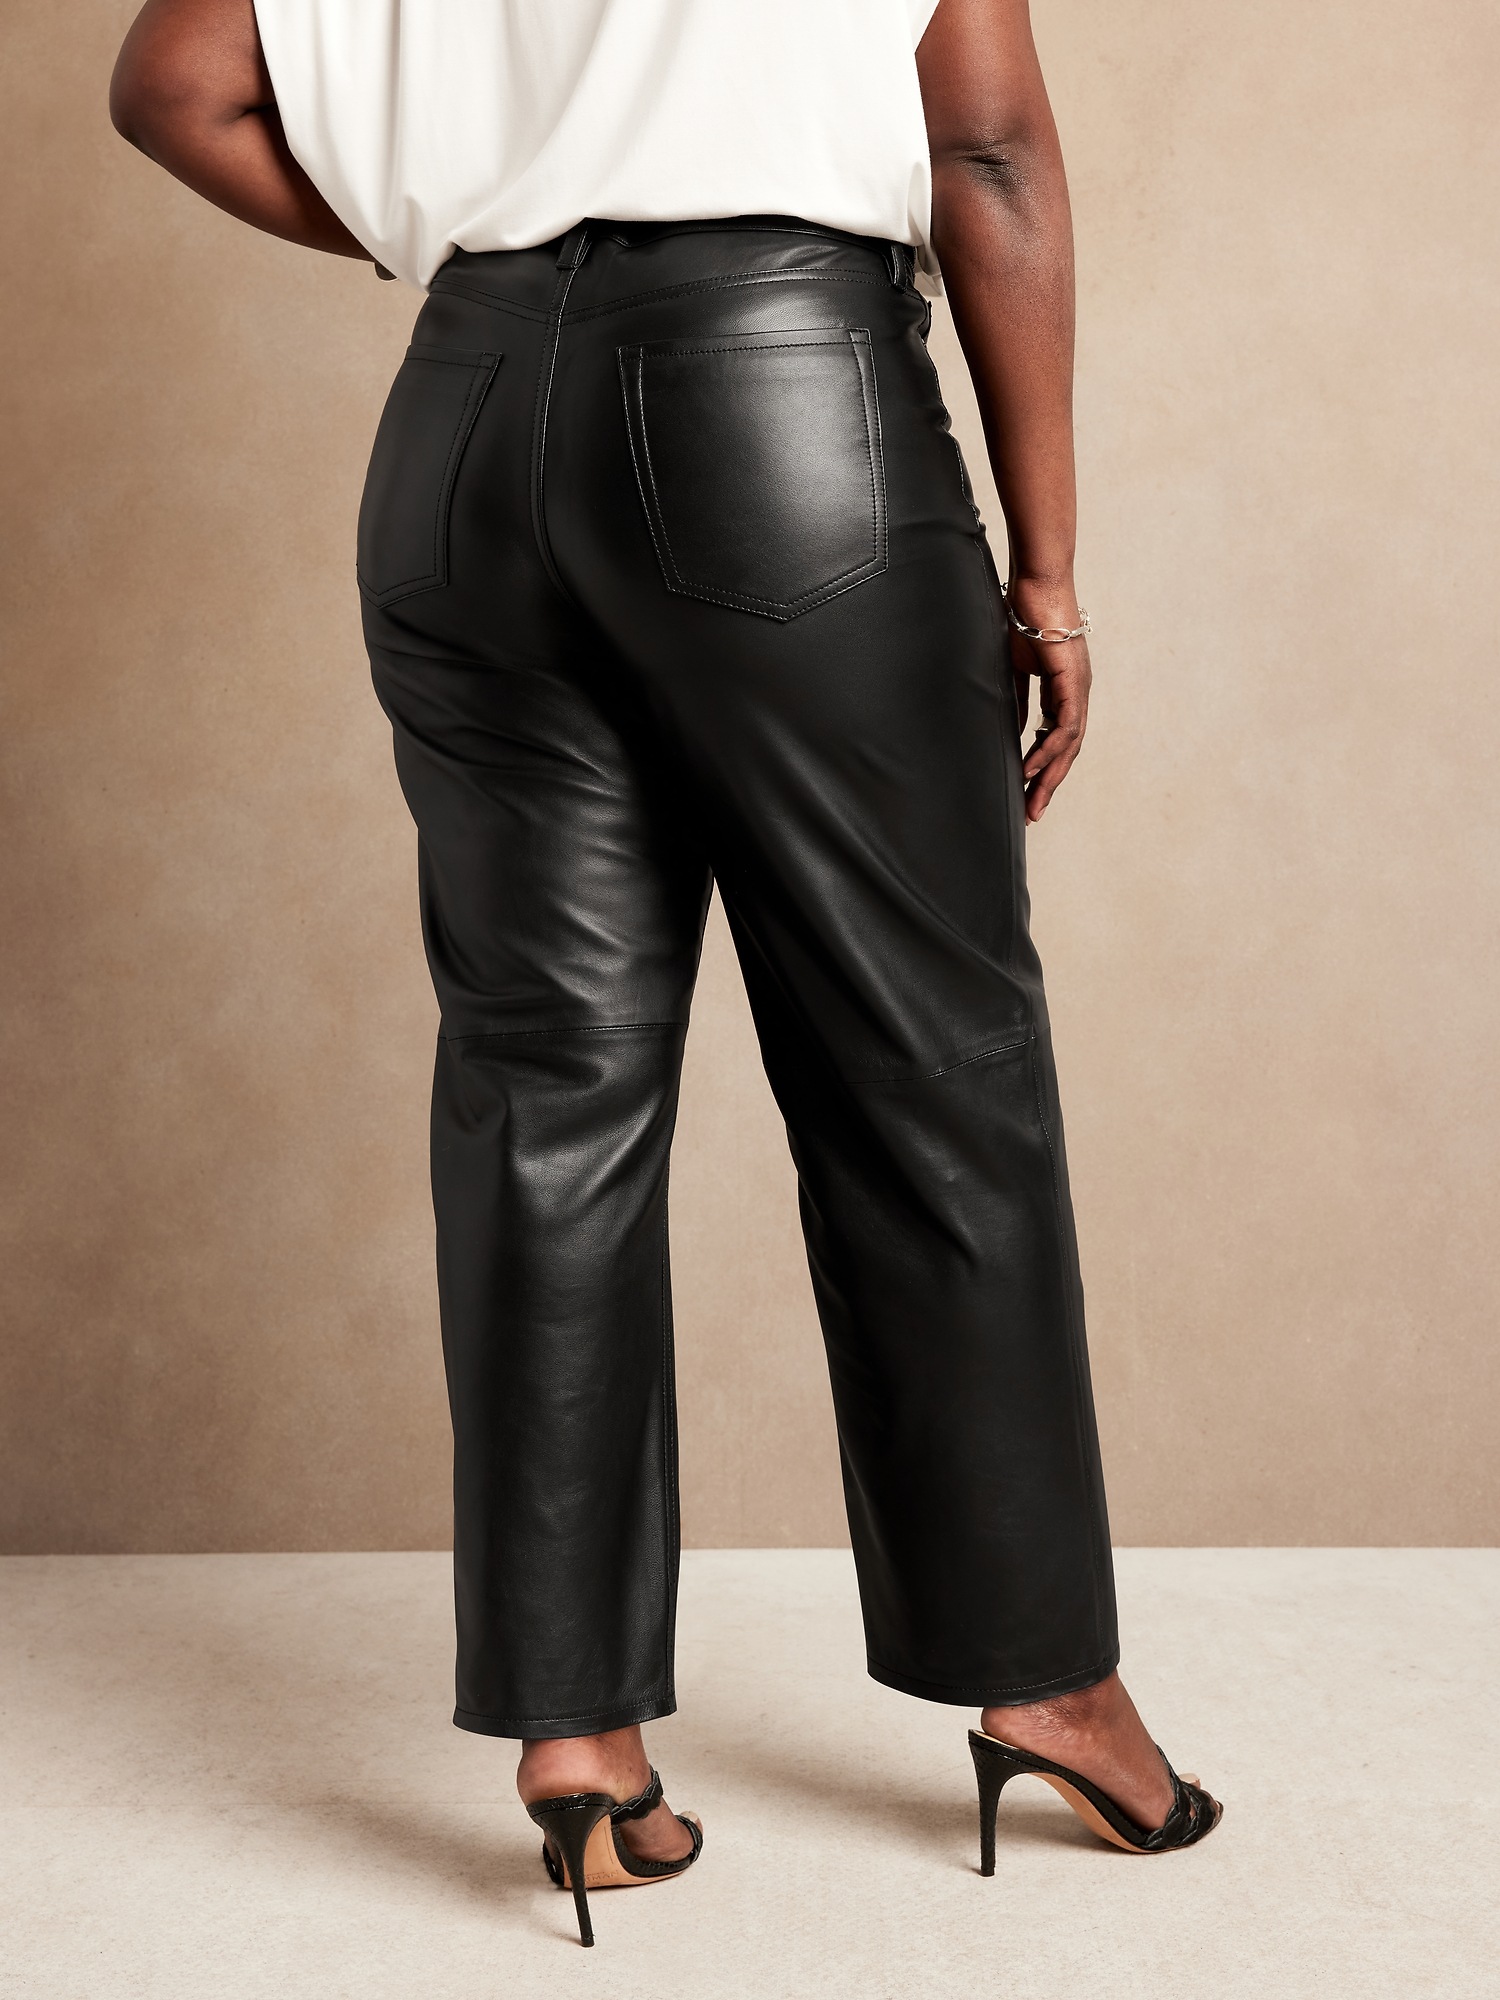 The Straight Leather Pant